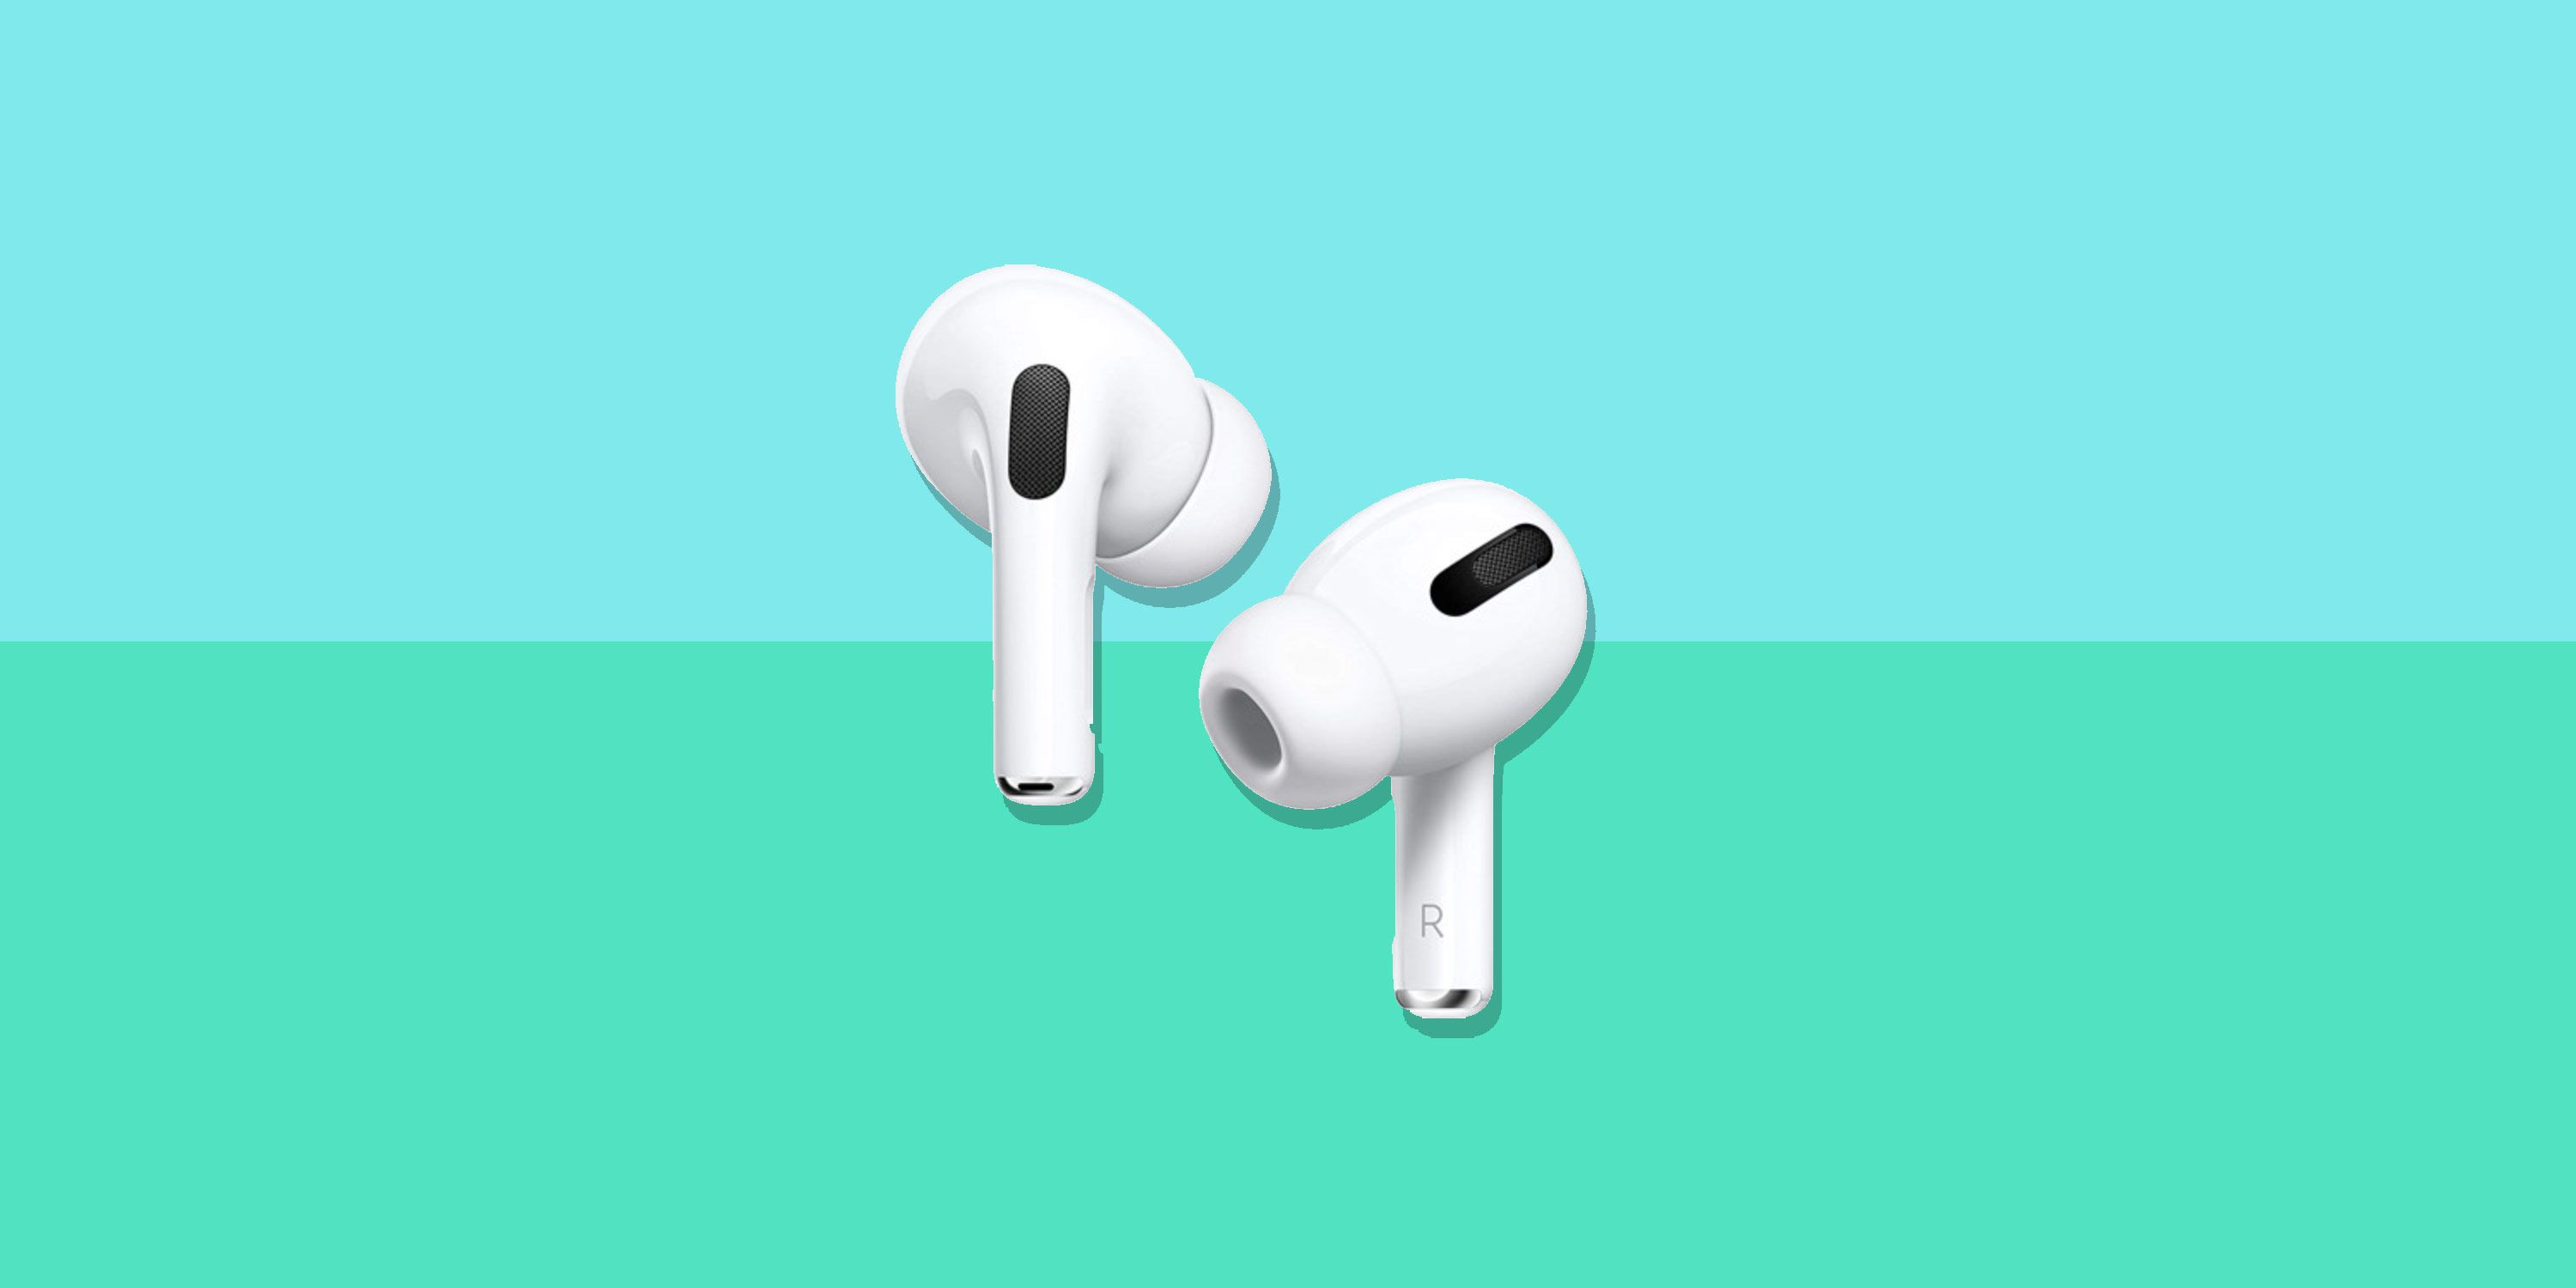 absorption tyk vokse op Apple AirPods Pro Sale at Amazon 2021 | The Strategist